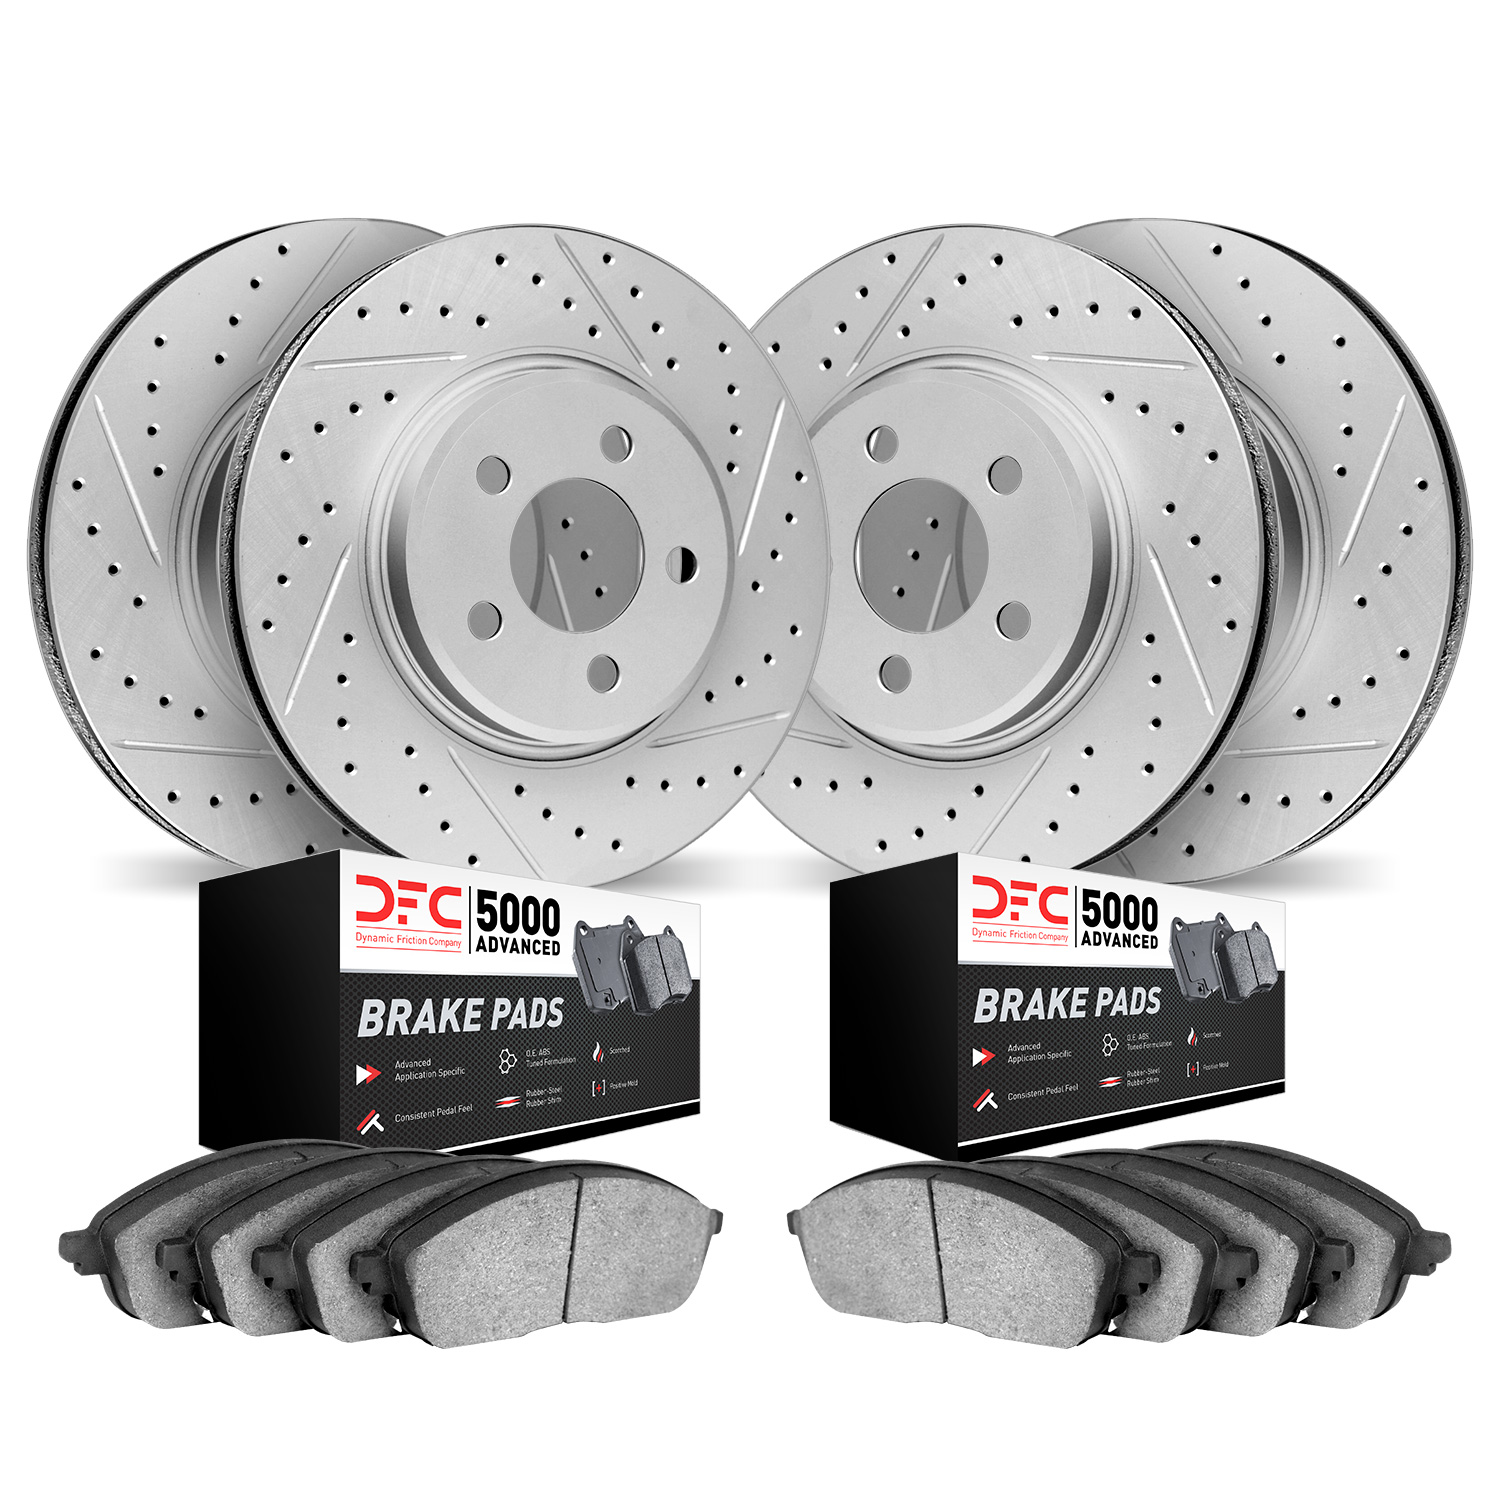 2504-31049 Geoperformance Drilled/Slotted Rotors w/5000 Advanced Brake Pads Kit, 2004-2006 BMW, Position: Front and Rear